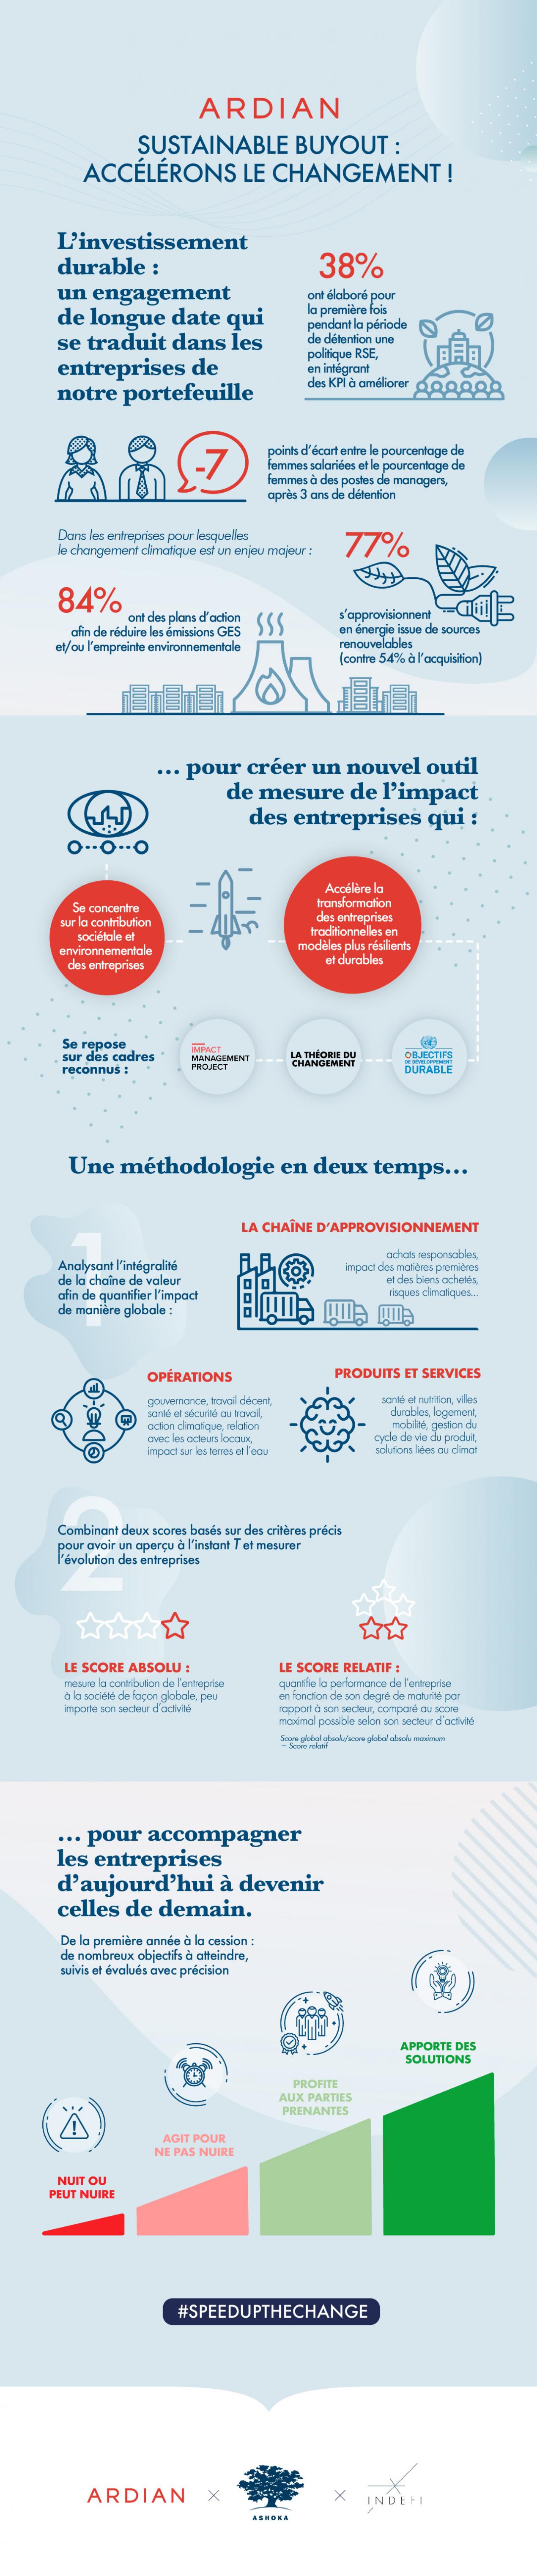 infographie sustainable buyout FR